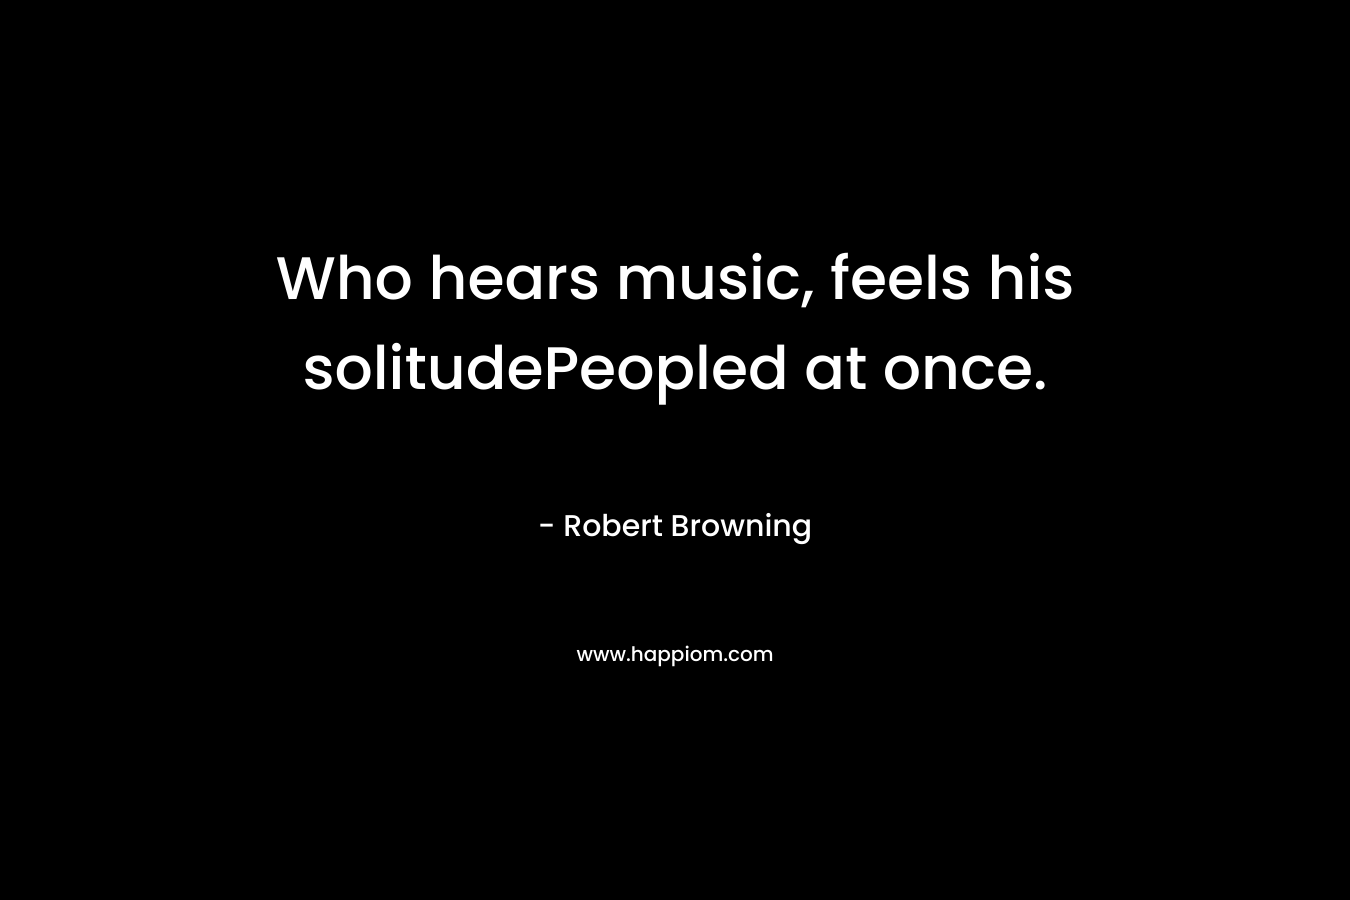 Who hears music, feels his solitudePeopled at once. – Robert Browning